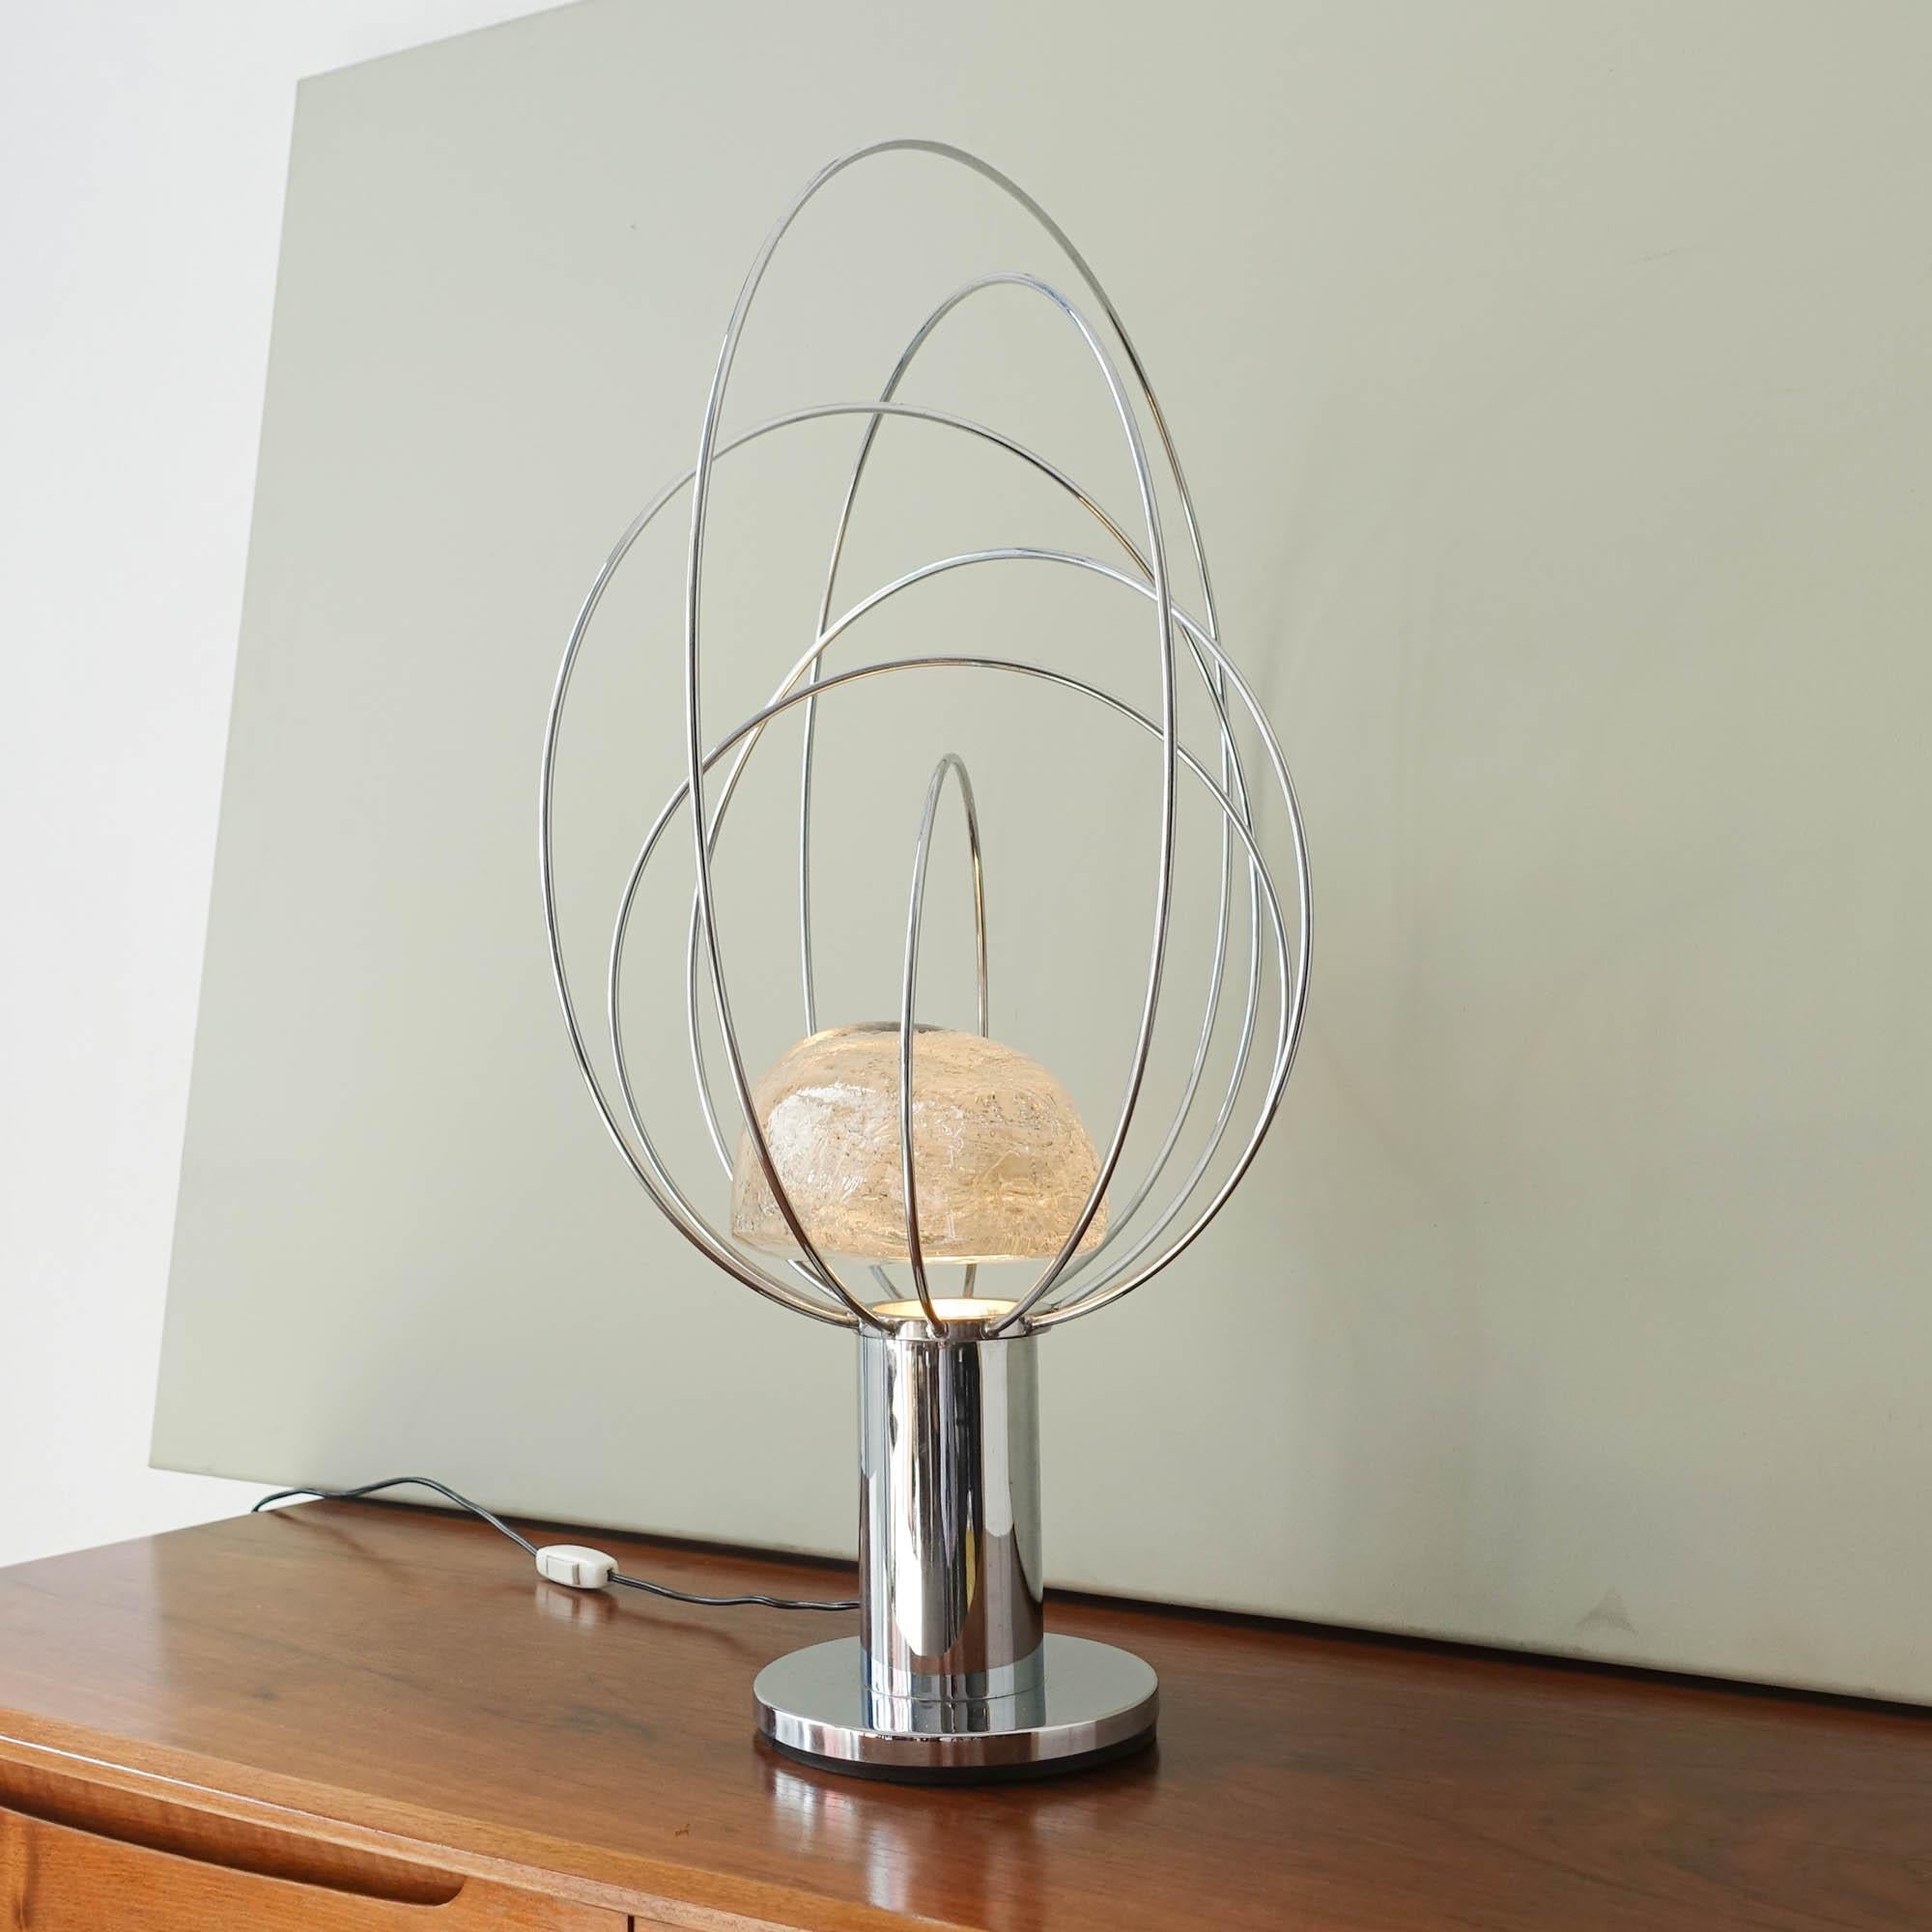 Spanish Planeta Table Lamp by Angelo Brotto for Fase, c. 1975